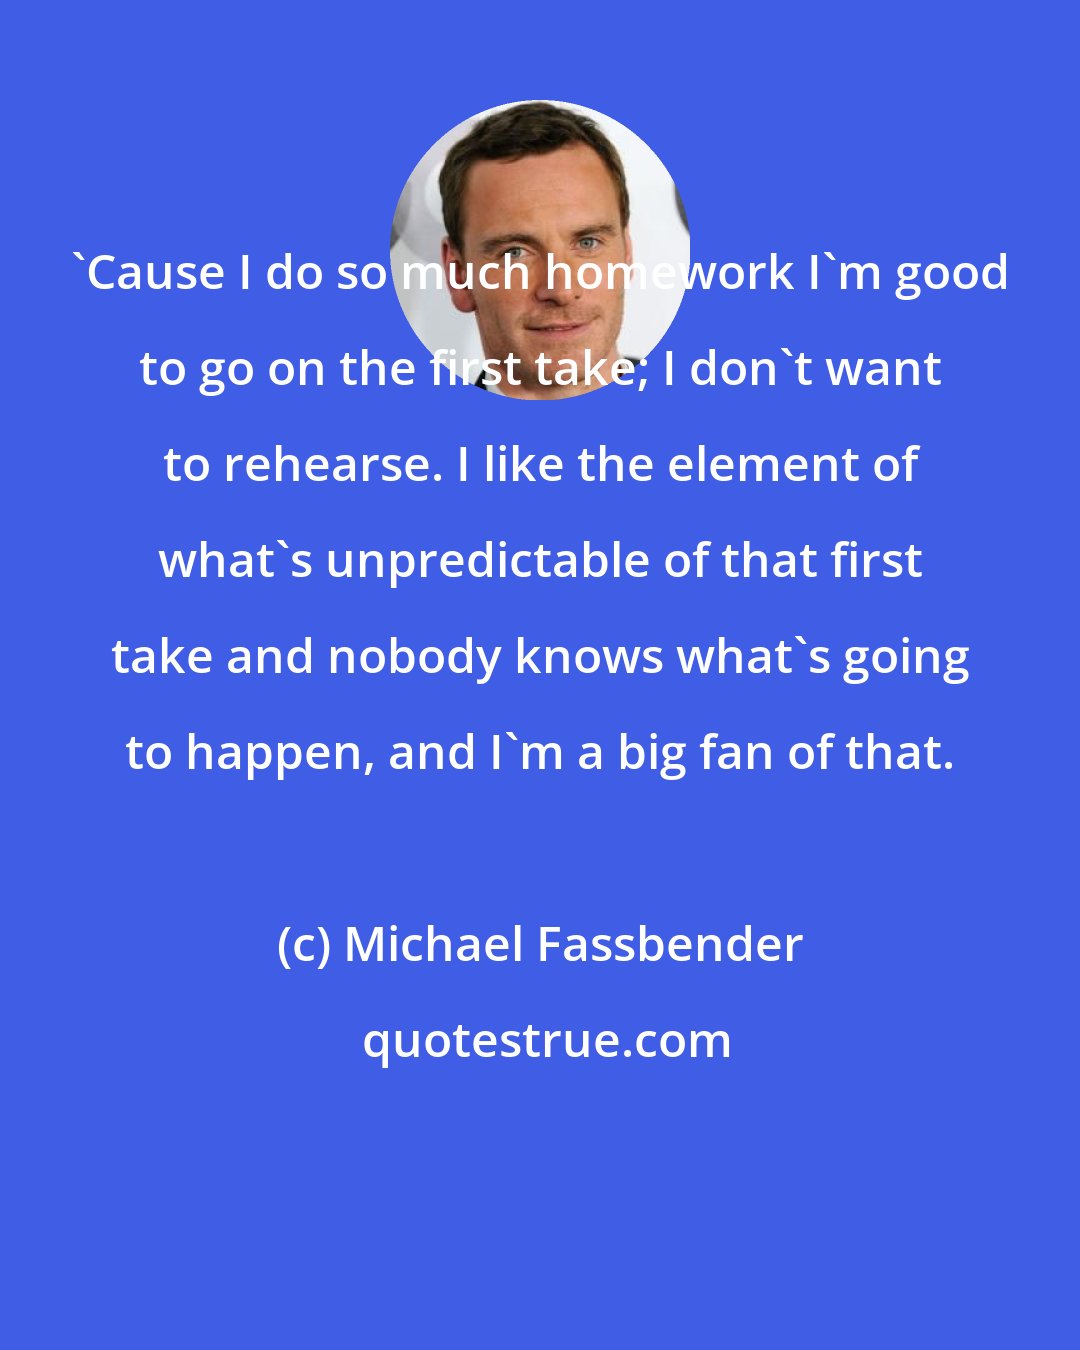 Michael Fassbender: 'Cause I do so much homework I'm good to go on the first take; I don't want to rehearse. I like the element of what's unpredictable of that first take and nobody knows what's going to happen, and I'm a big fan of that.